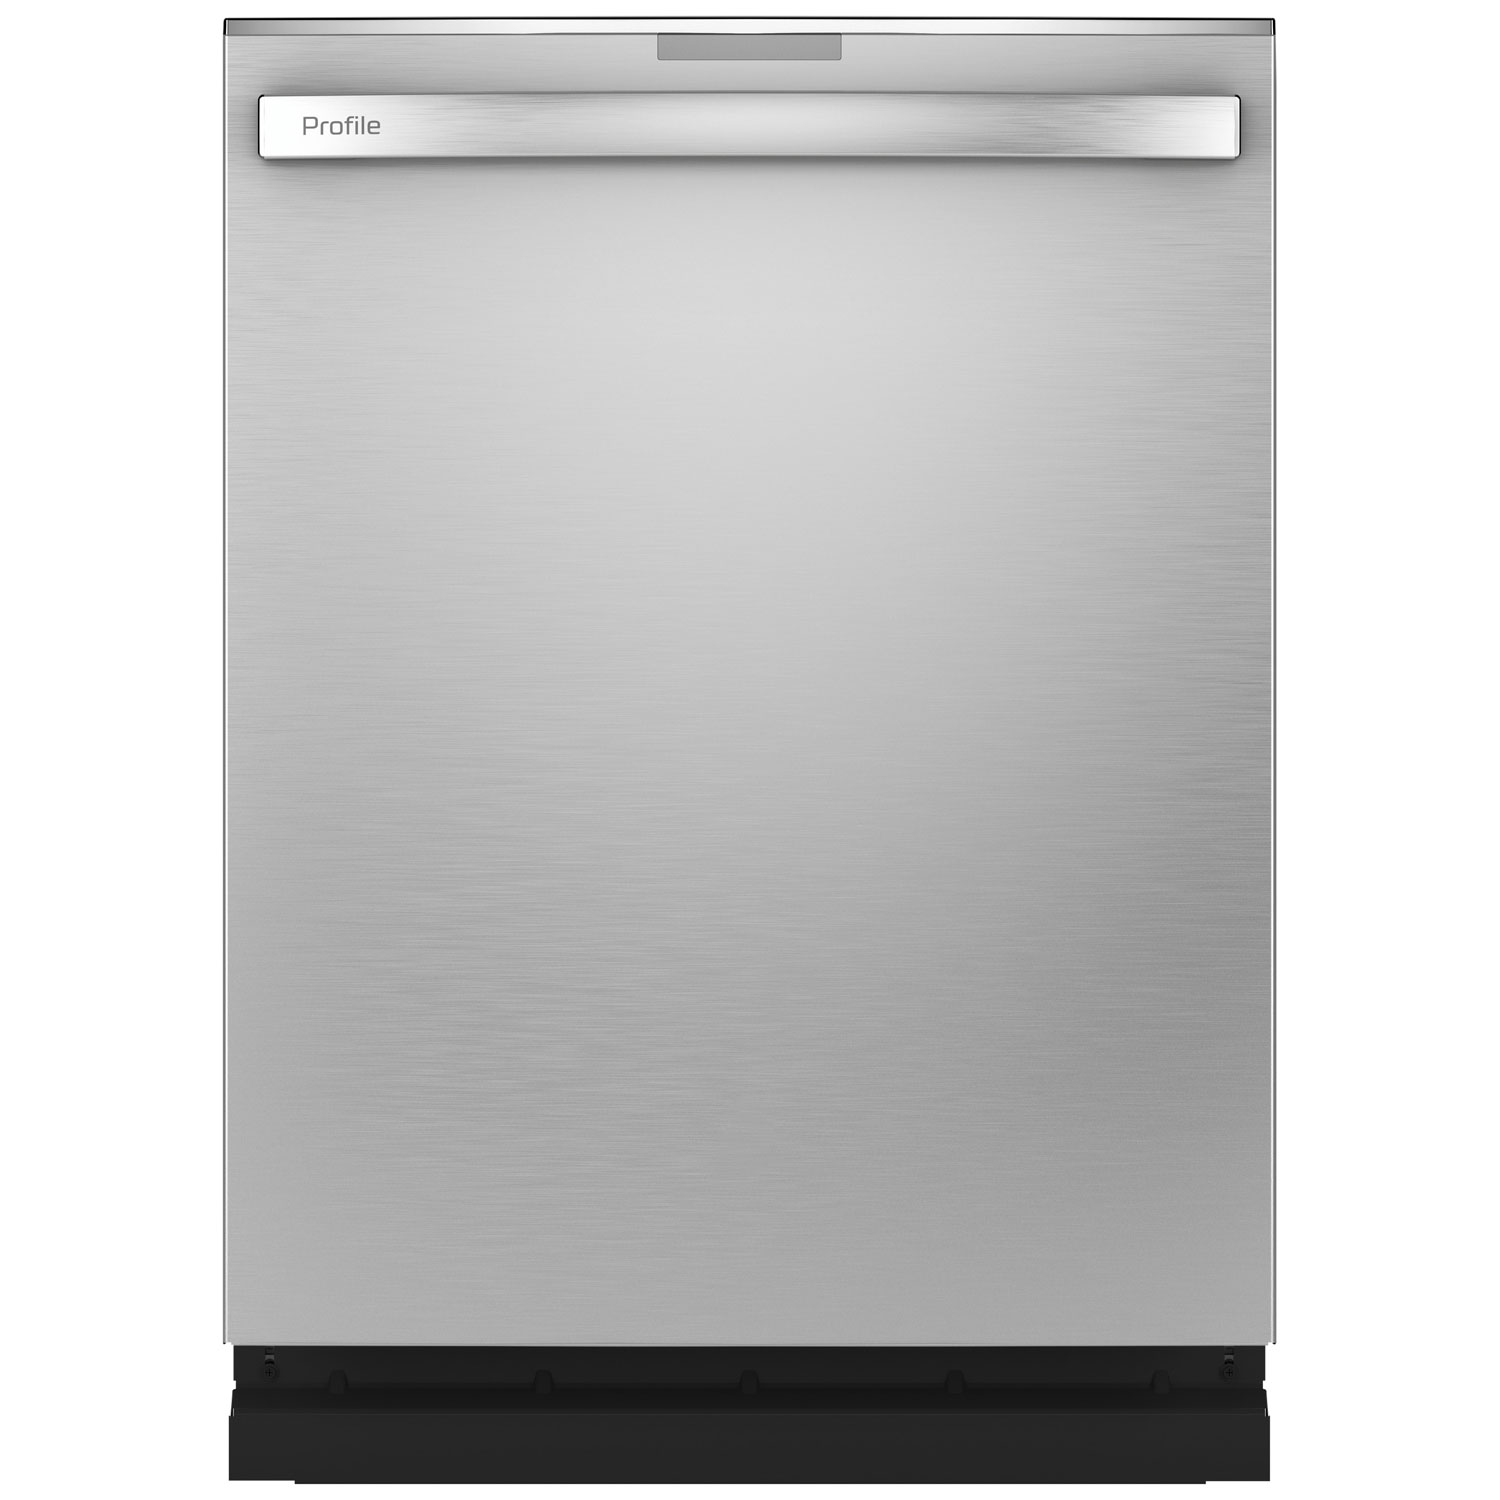 GE Profile 24" 39dB Built-In Dishwasher with Stainless Steel Tub & Third Rack (PDT785SYNFS) -Stainless